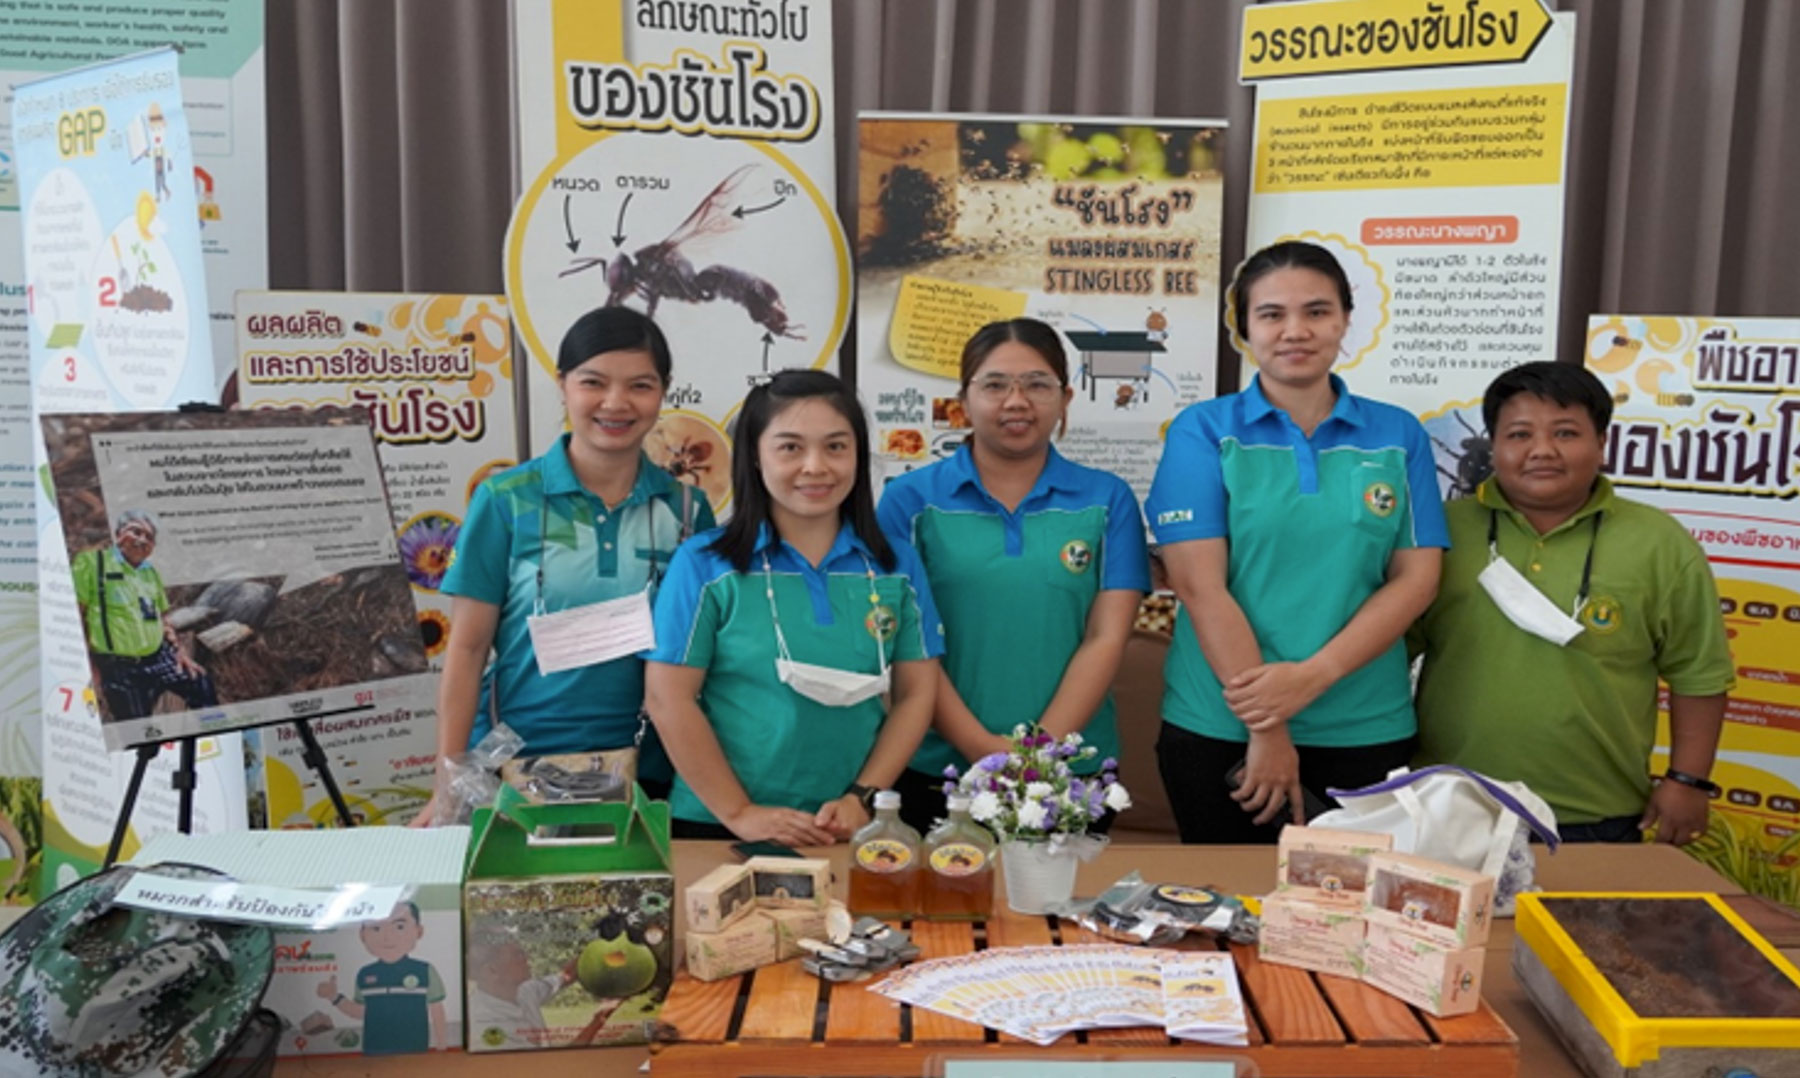 Department of Agricultural Extension staff at exhibition area of ReCAP closing event.